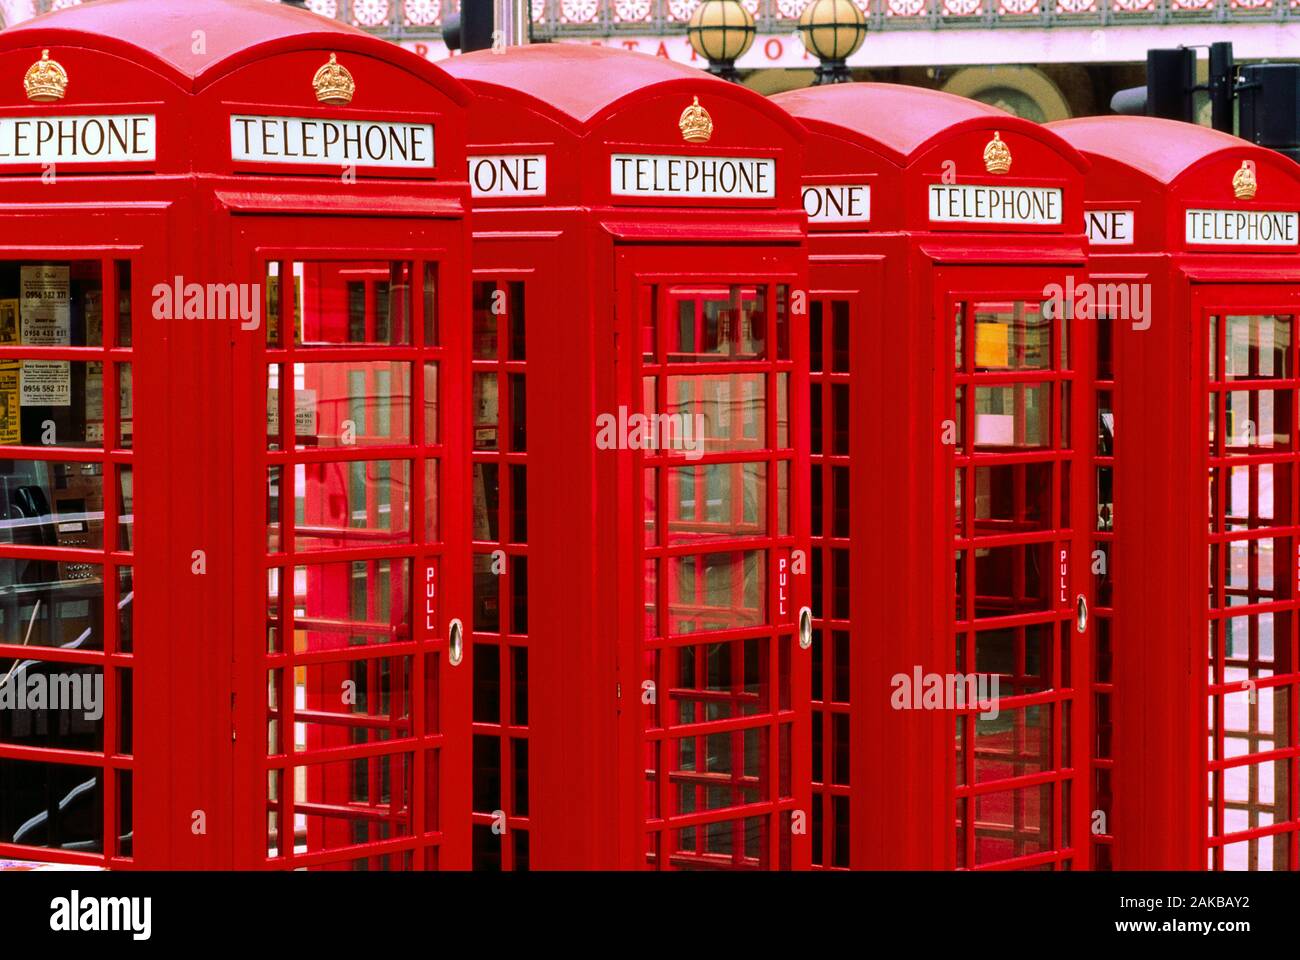 Group of red telephone booths on street, London, England, UK Stock Photo